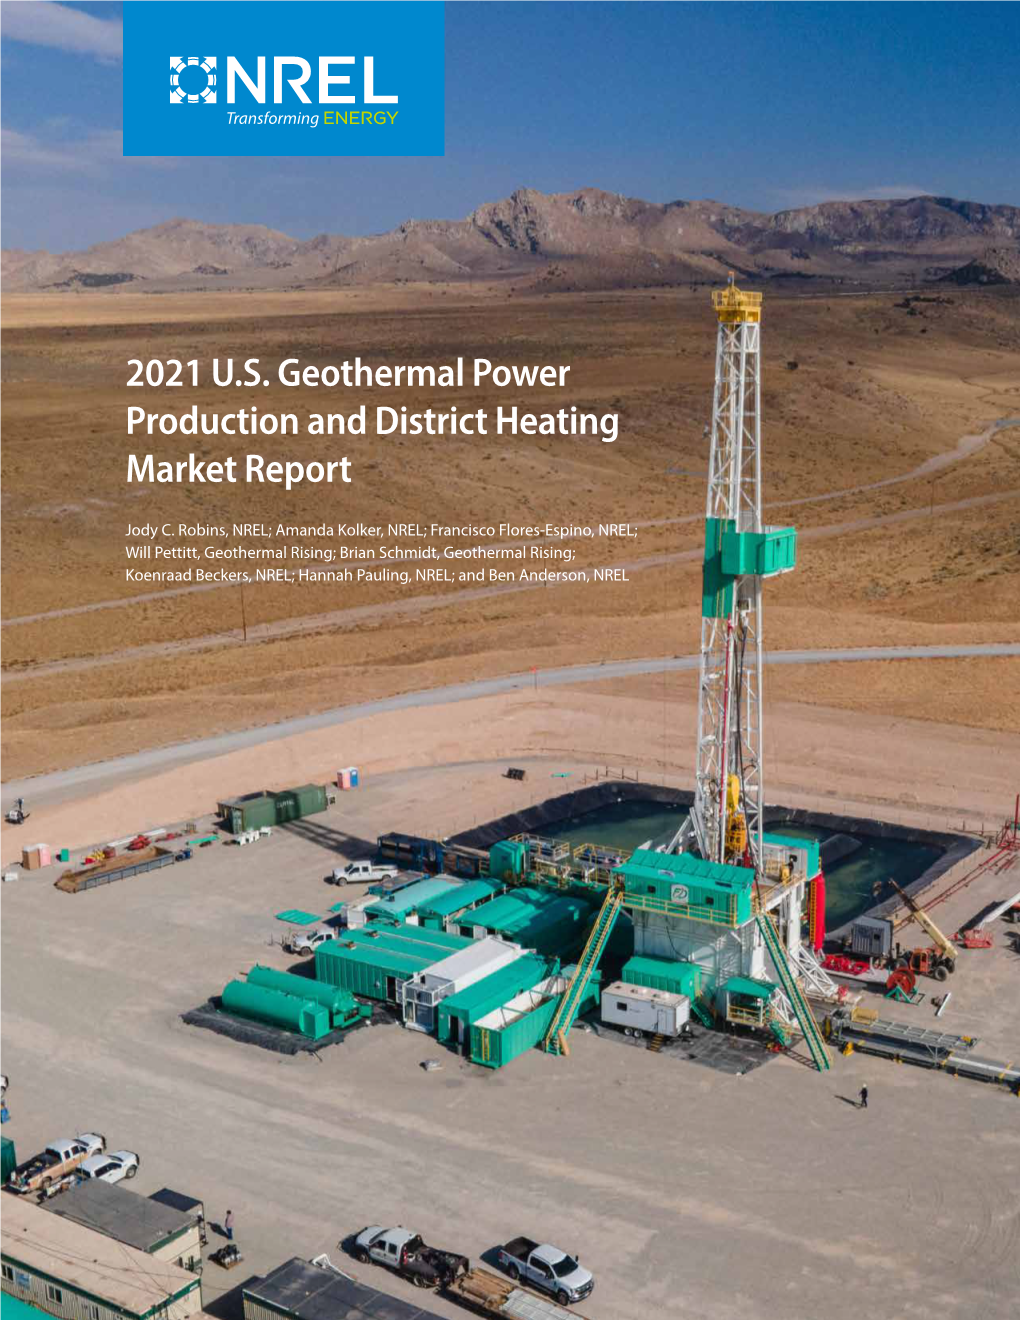 2021 U.S. Geothermal Power Production and District Heating Market Report